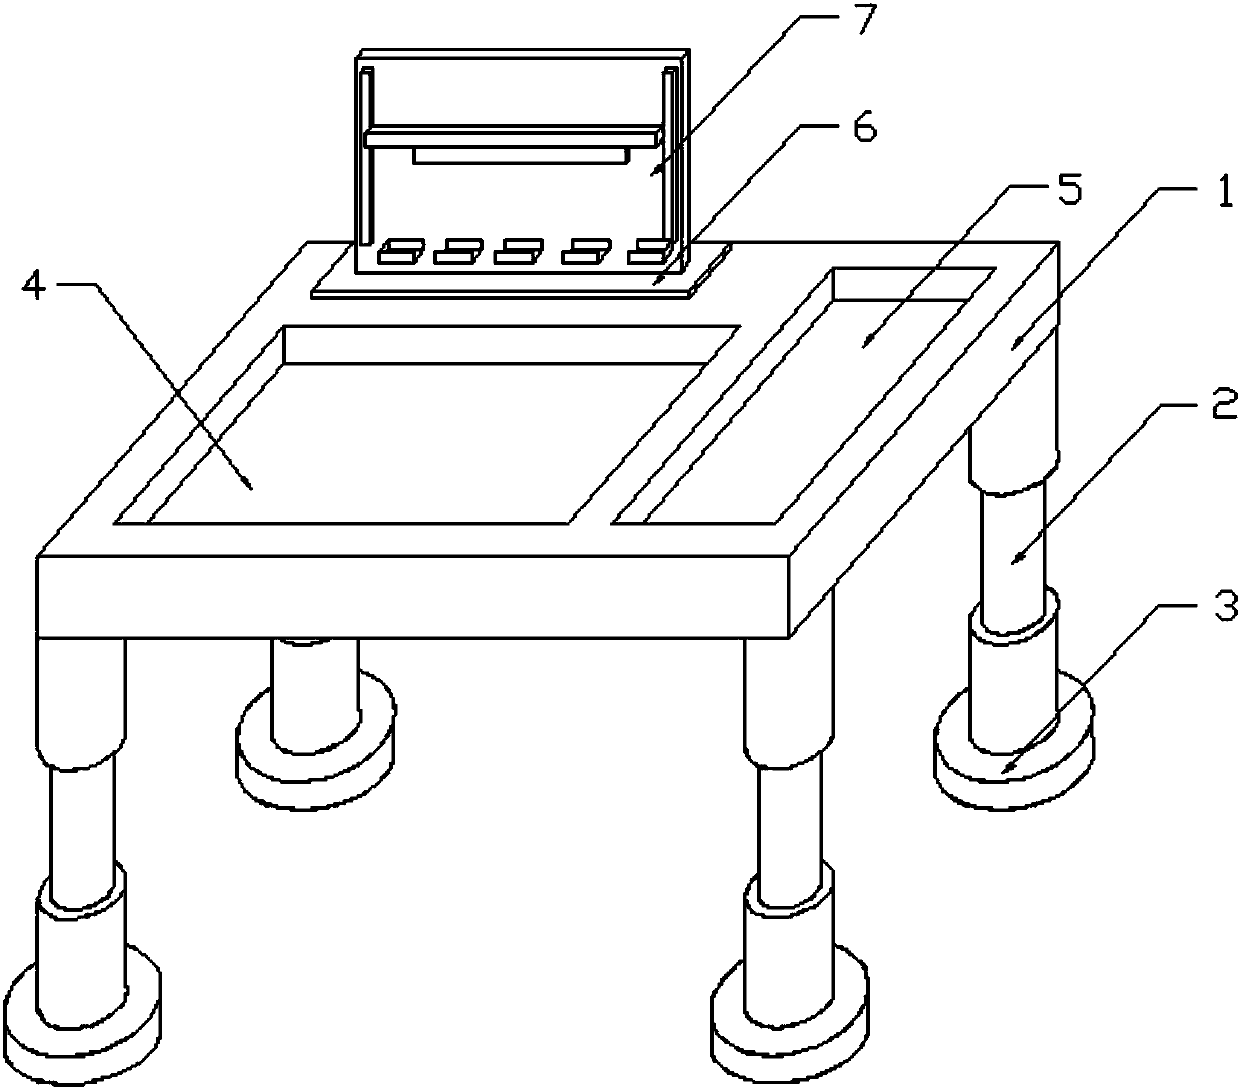 Multifunctional fine art drawing displaying integrated table